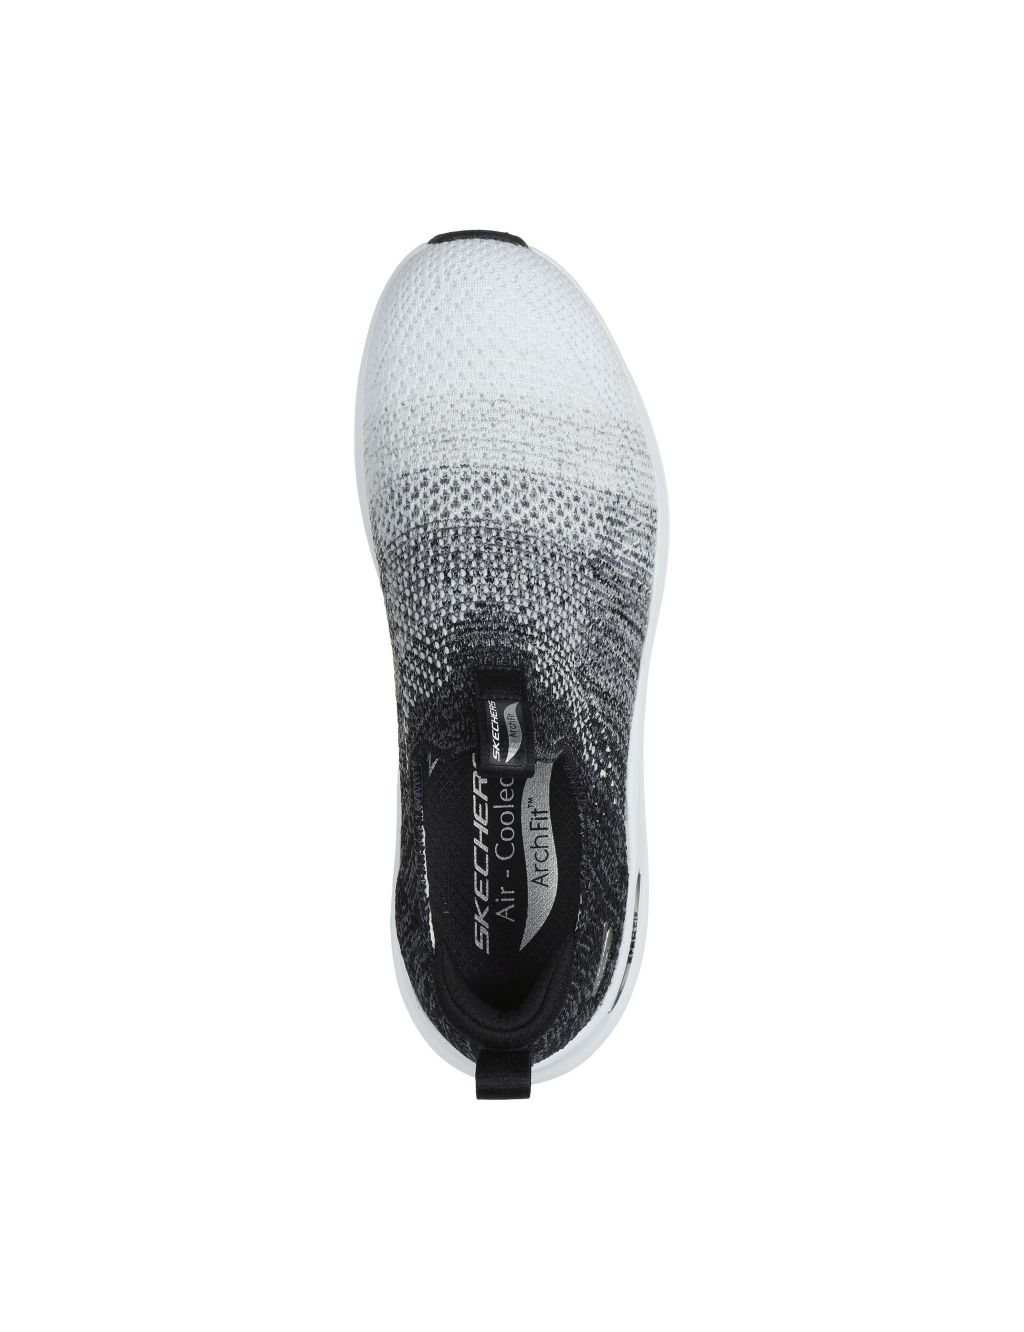 Arch Fit 2.0 Slip On Trainers image 4